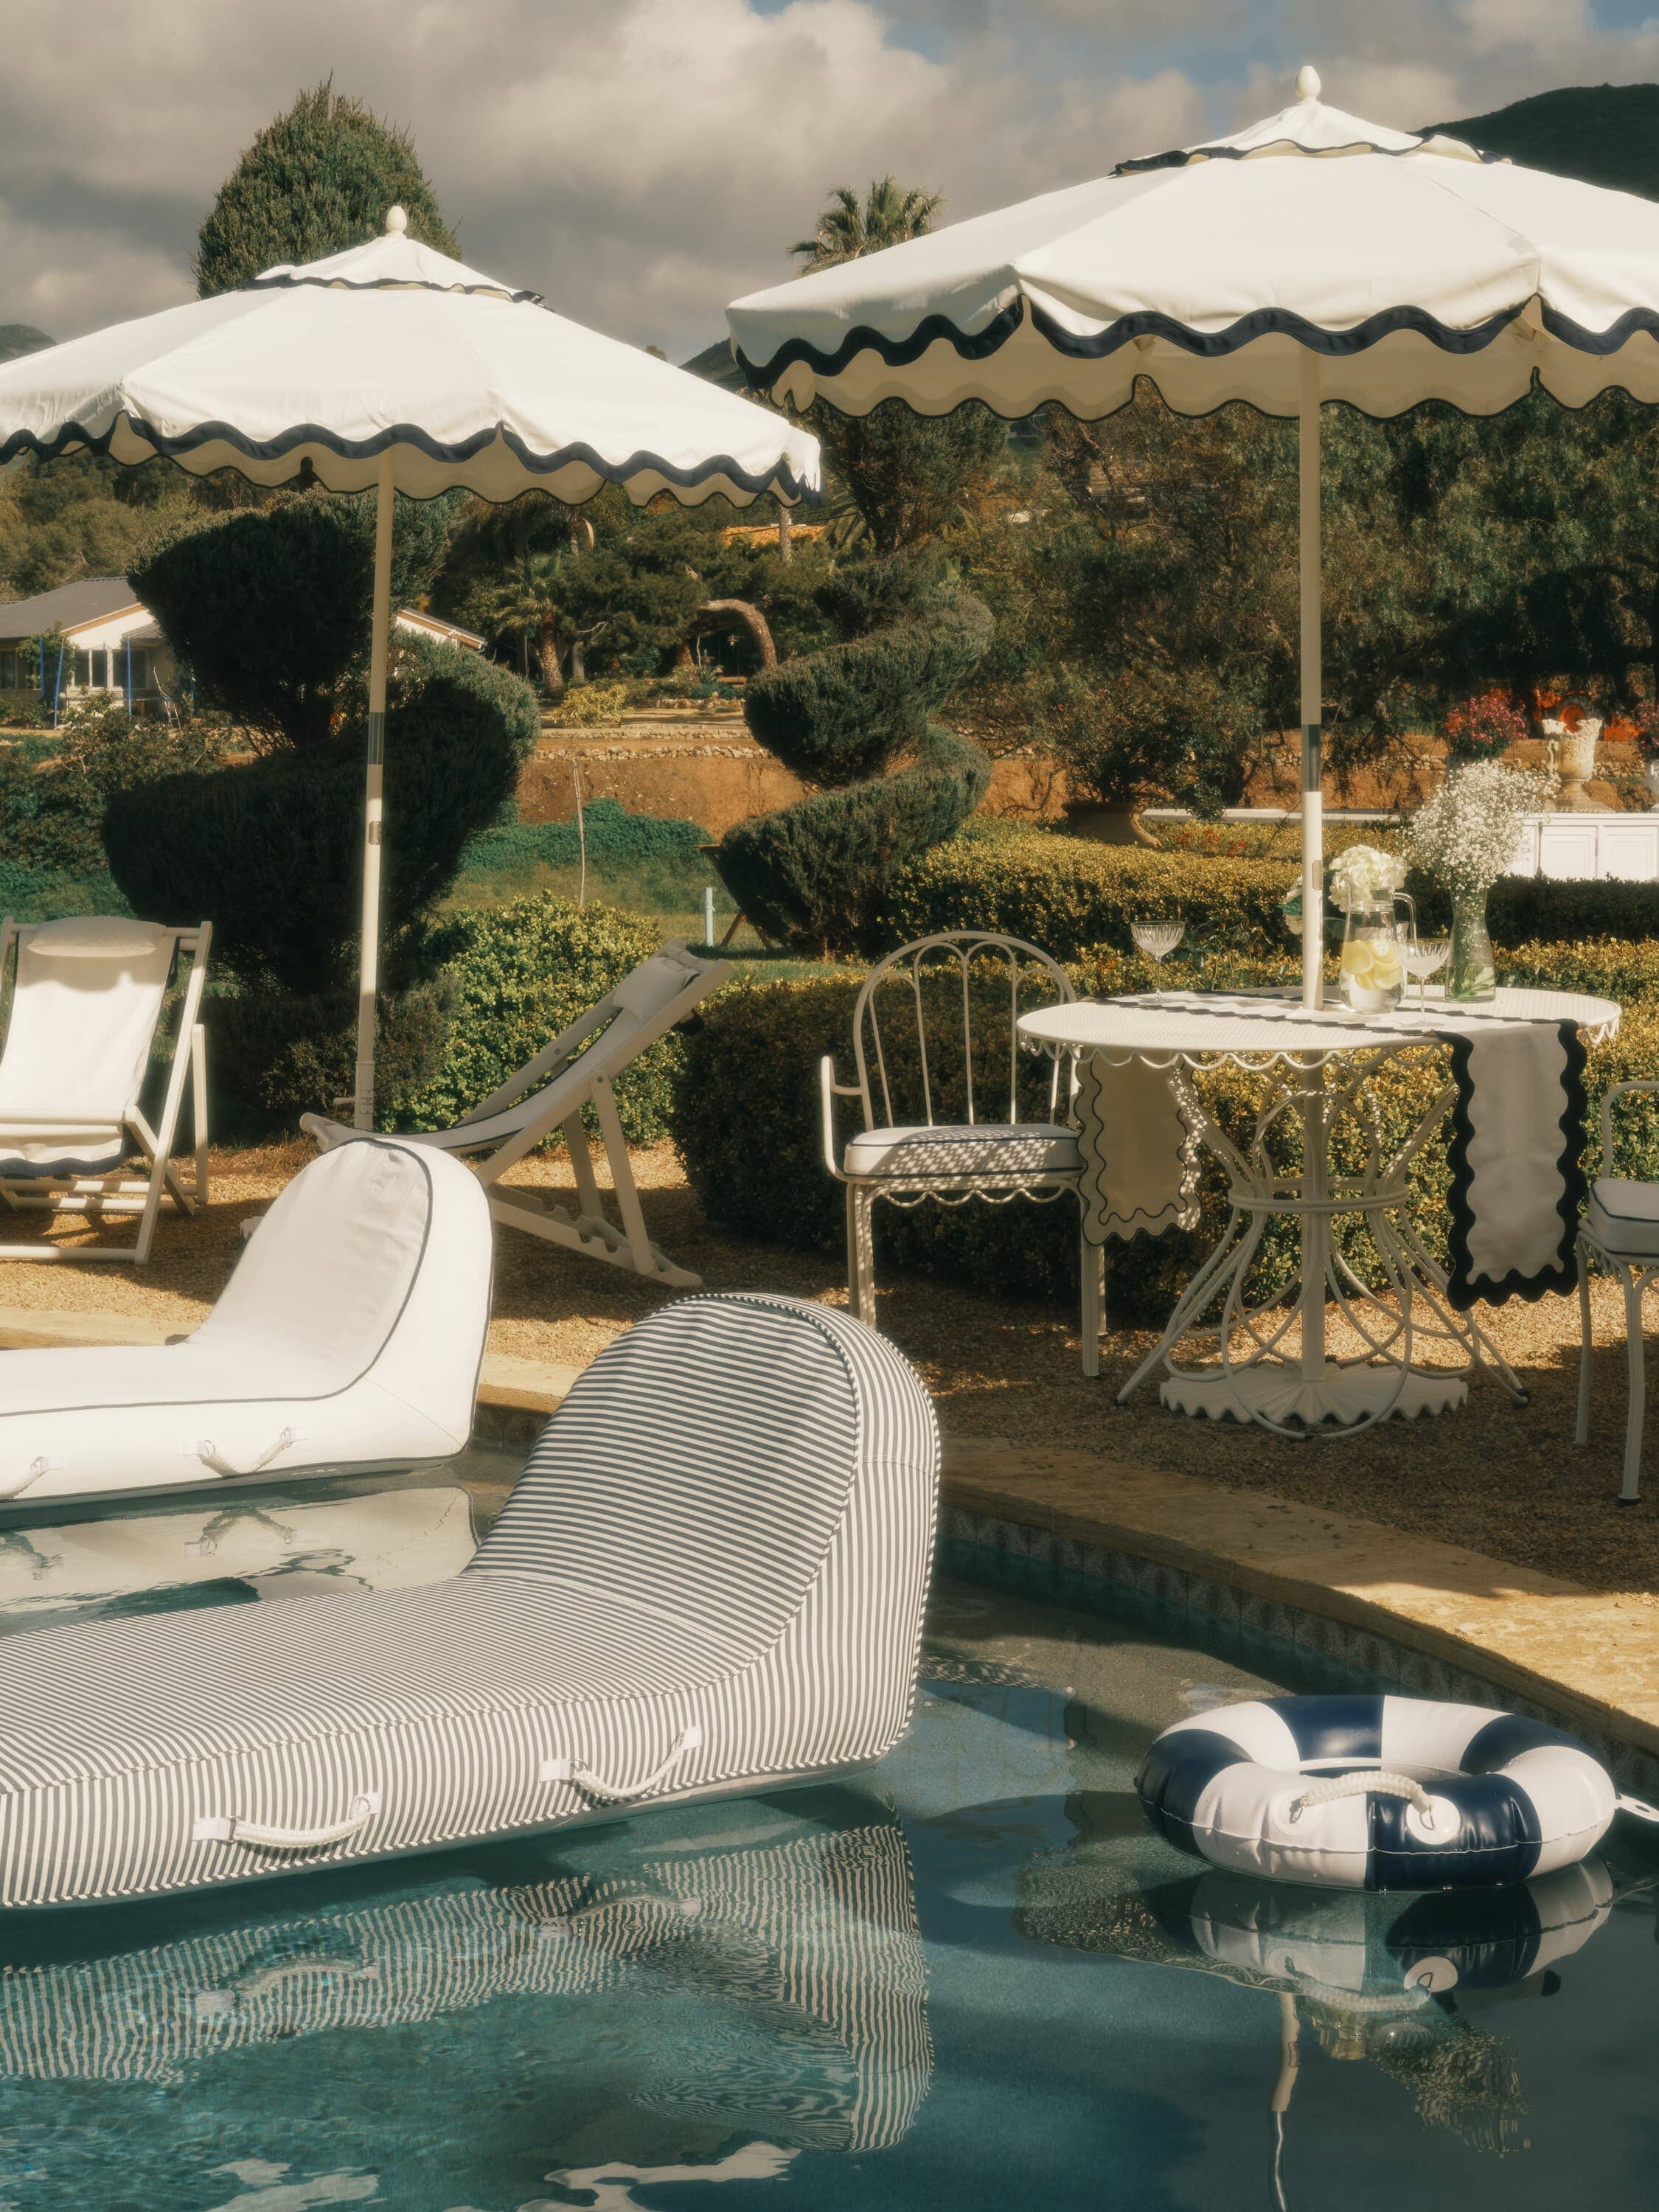 Pool setting with pool floats, pool loungers and furniture.